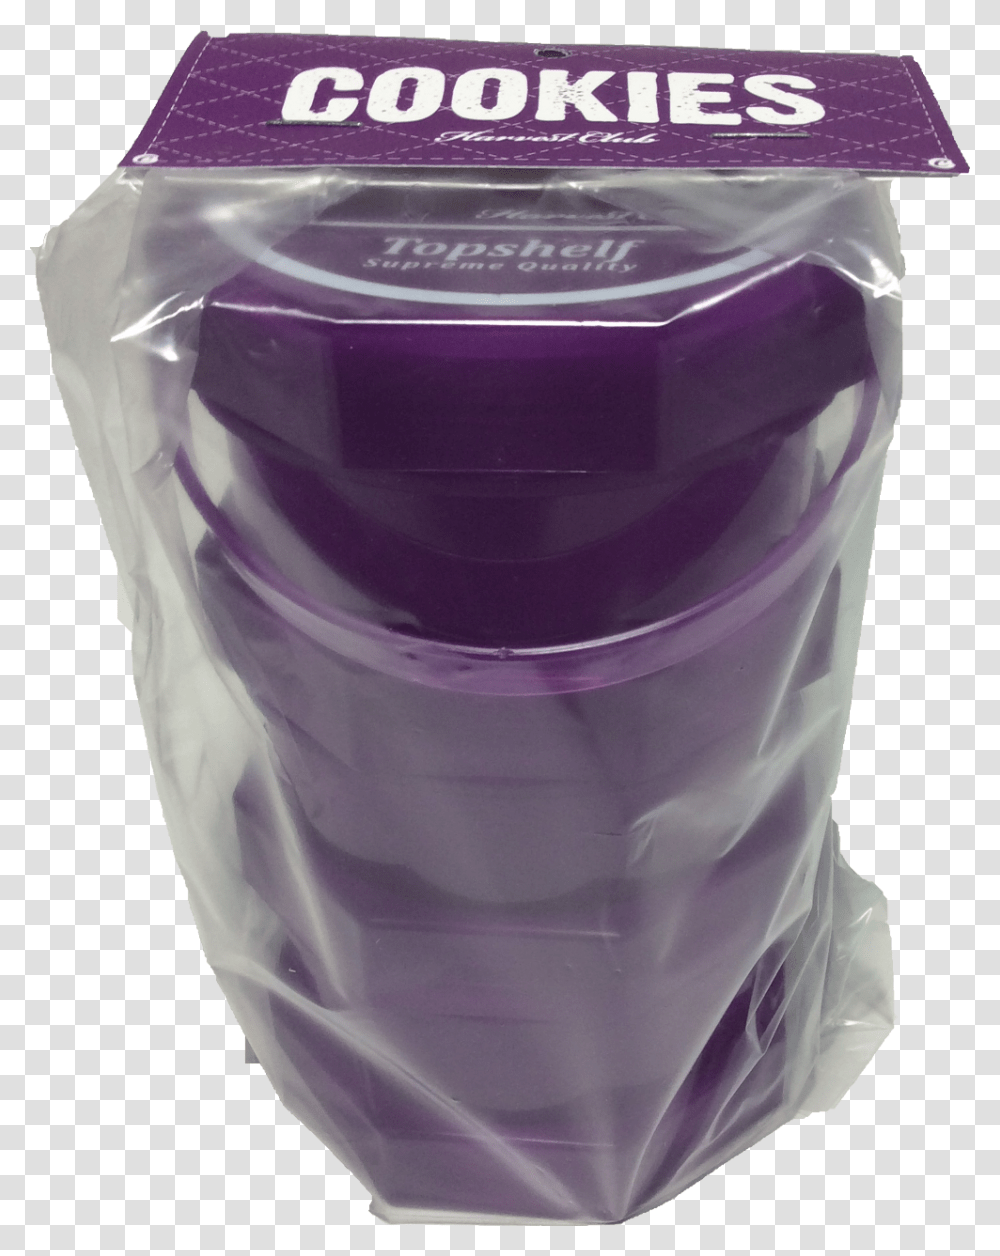 Cookies Jar All In One Purple Jim Thome Rookie Card, Diaper, Plant, Vase, Pottery Transparent Png